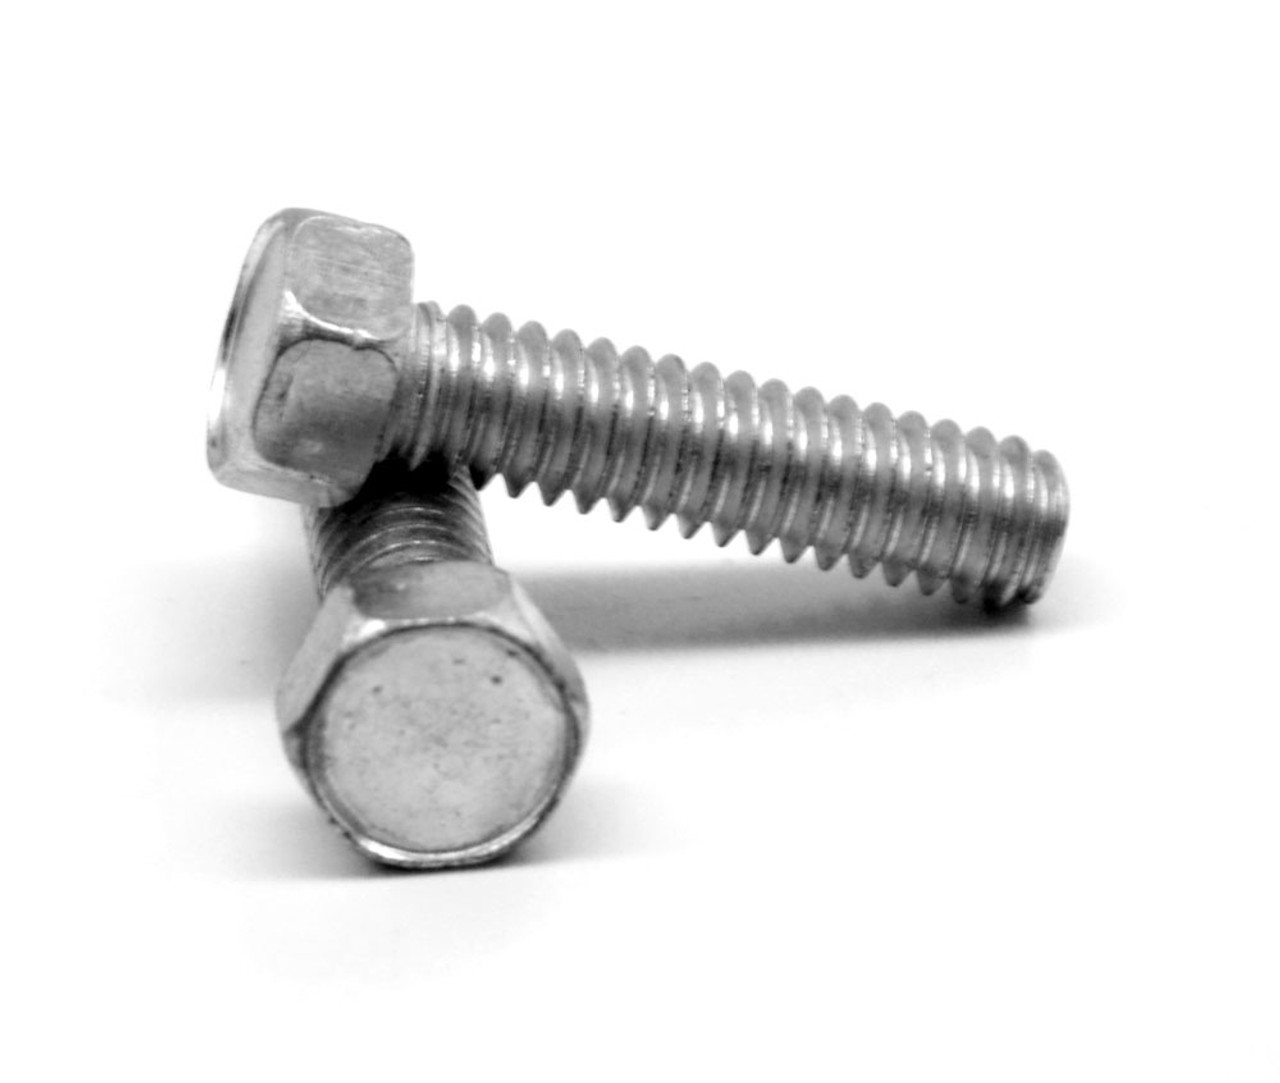 #4-40 x 5/16" (FT) Coarse Thread Machine Screw Indented Hex Head Low Carbon Steel Zinc Plated